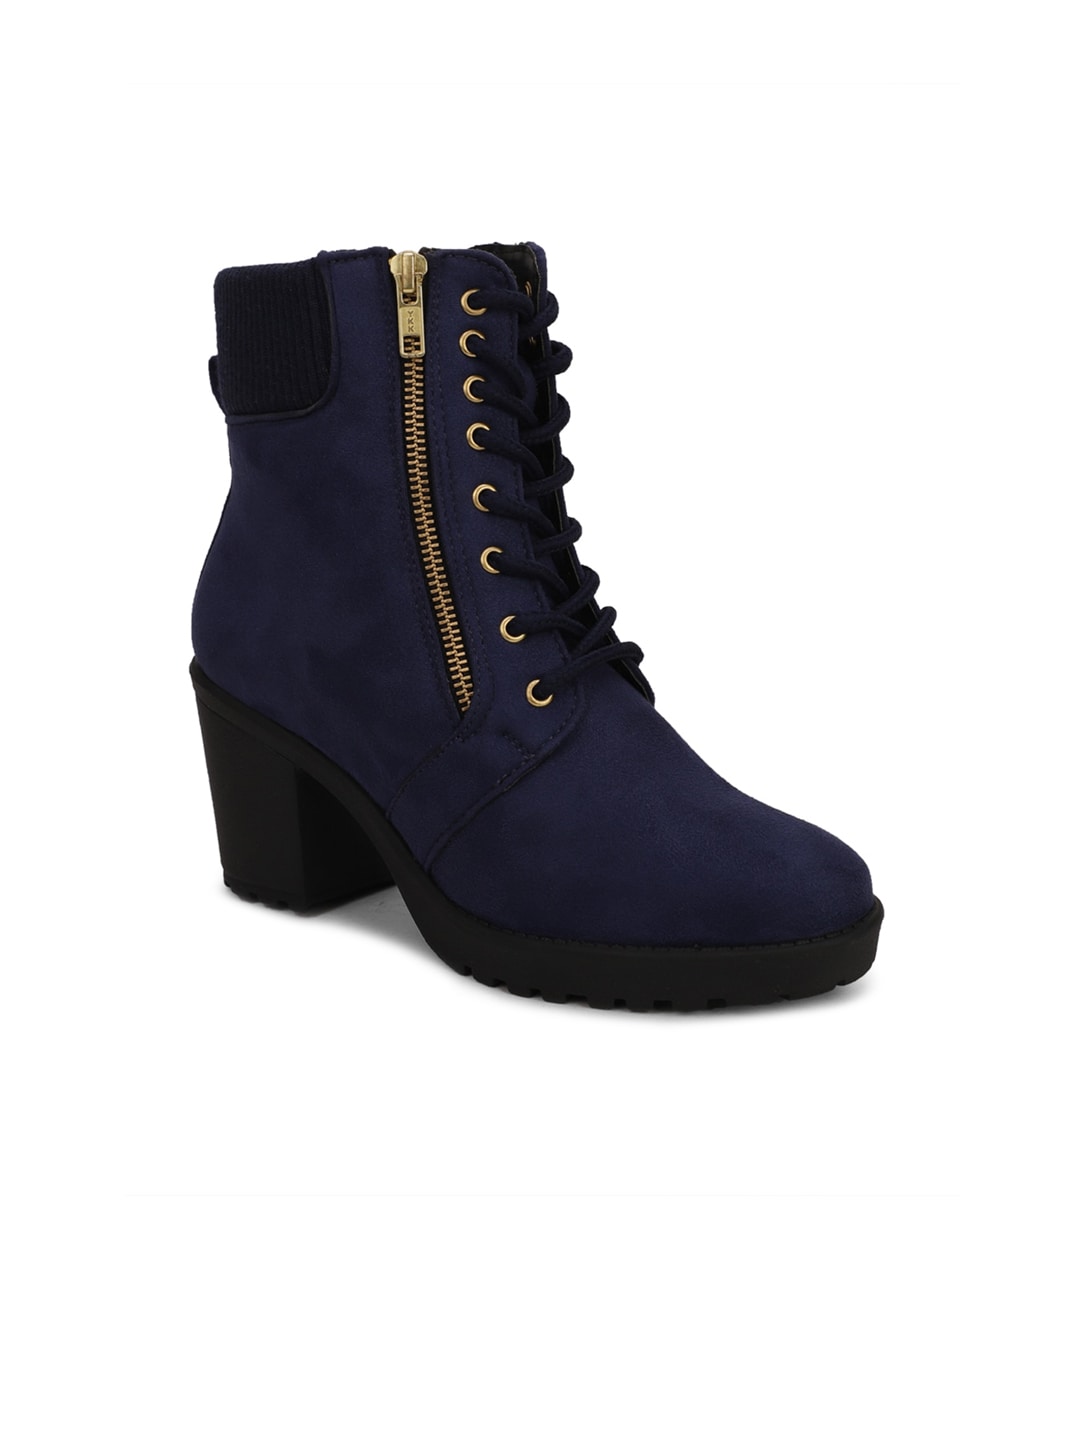 Bruno Manetti Navy Blue Suede Block Heeled Boots with Laser Cuts Price in India